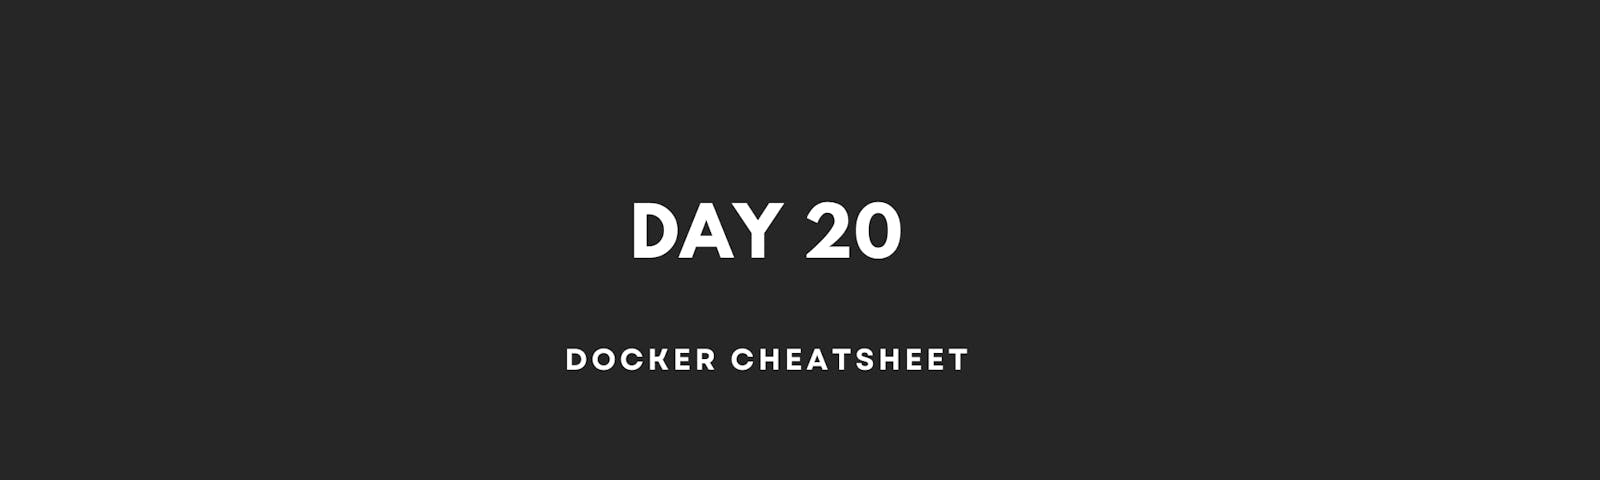 Docker Cheatsheet for DevOps and Container Enthusiasts!